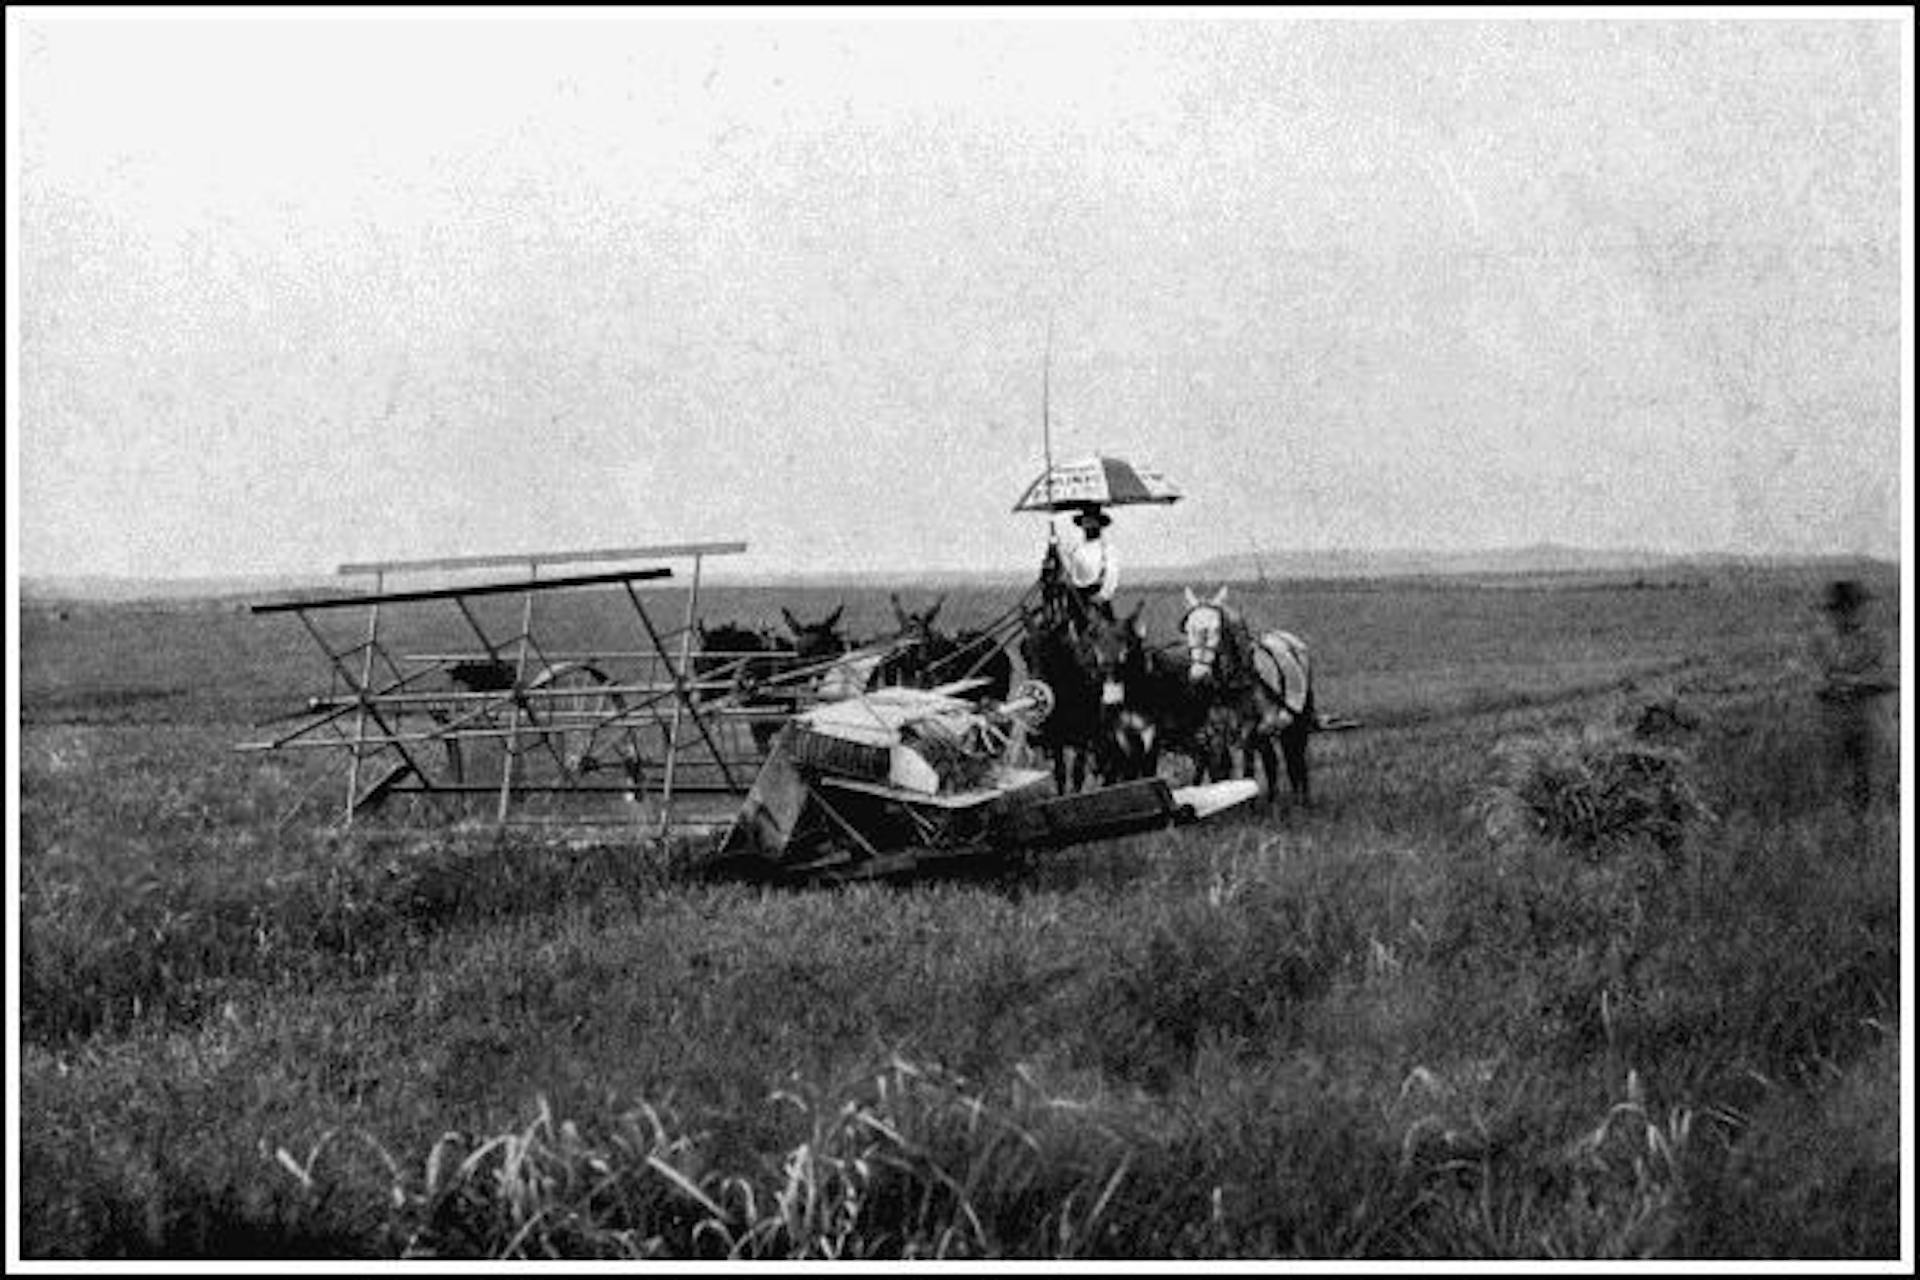 A WHEAT-CUTTER
A "heading reaper" being pushed over a wheat crop by six mules. It cuts off the ears only, leaving the straw standing. The largest machines of this type used in California take swathes 50 feet broad.